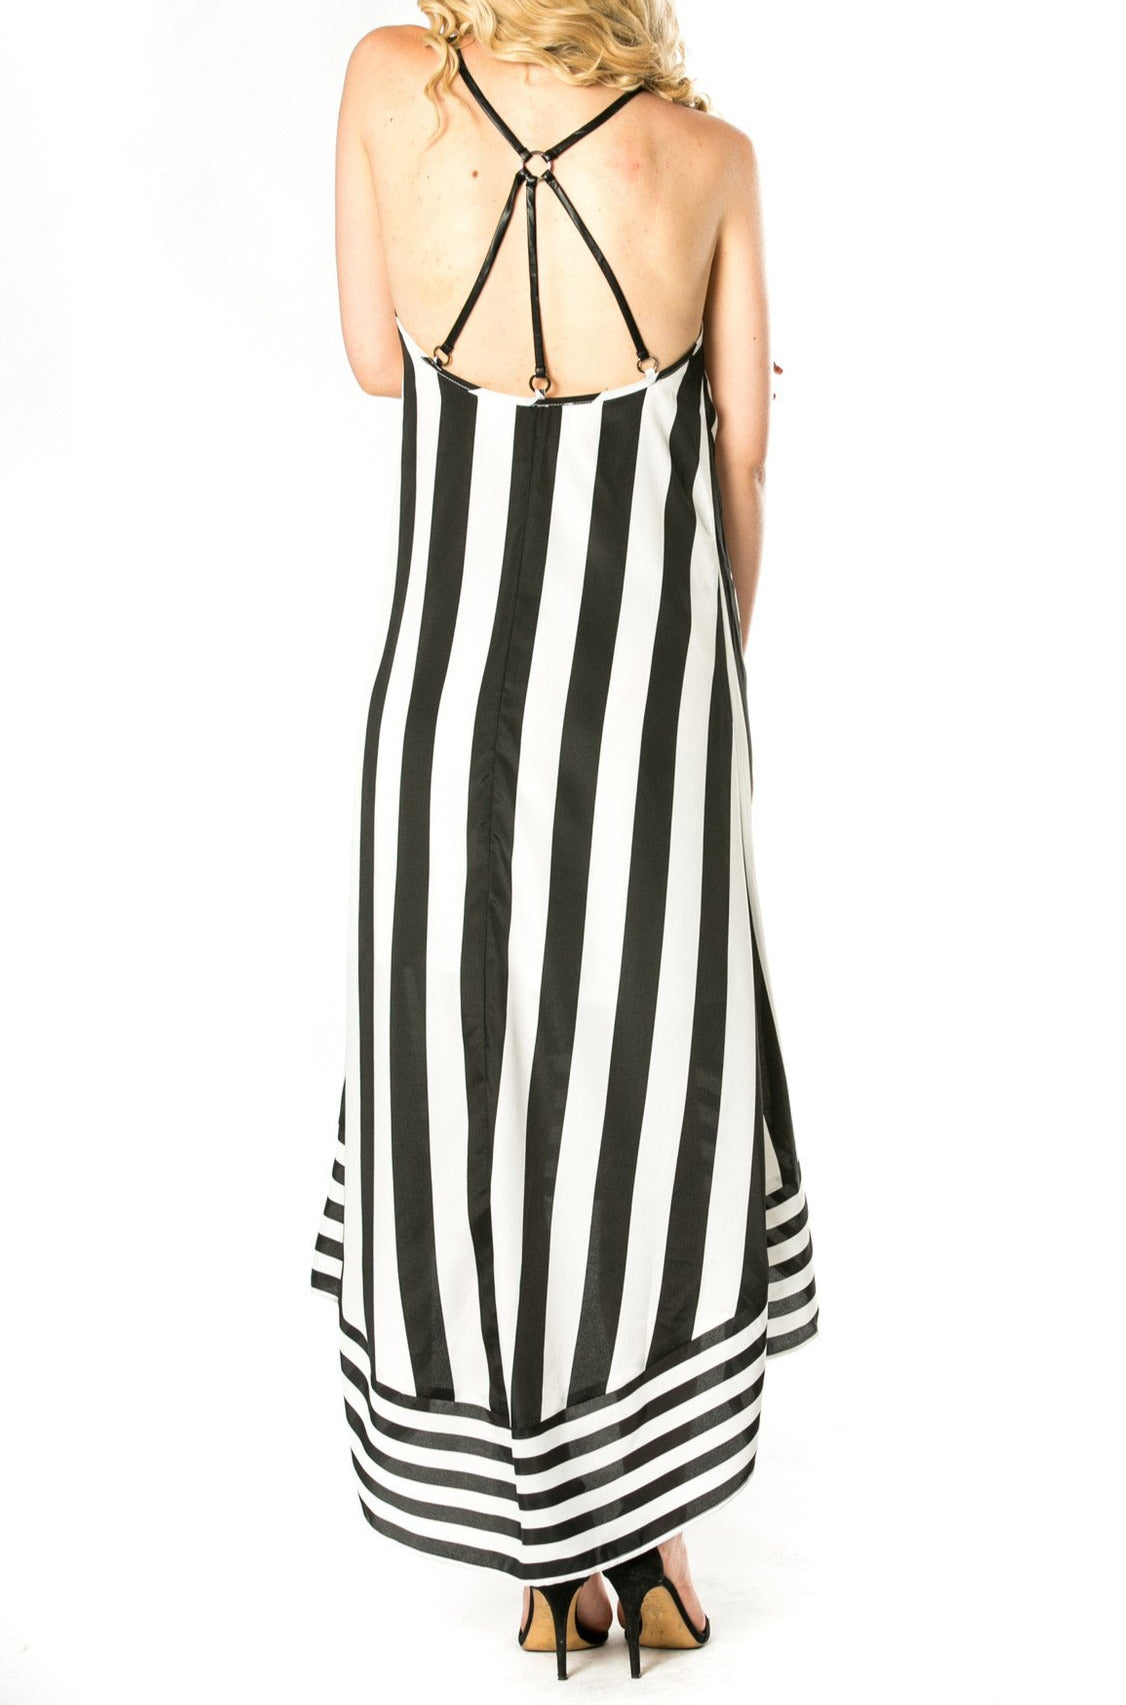 Striped High-Low Dress With Crossed Straps (198092062743)